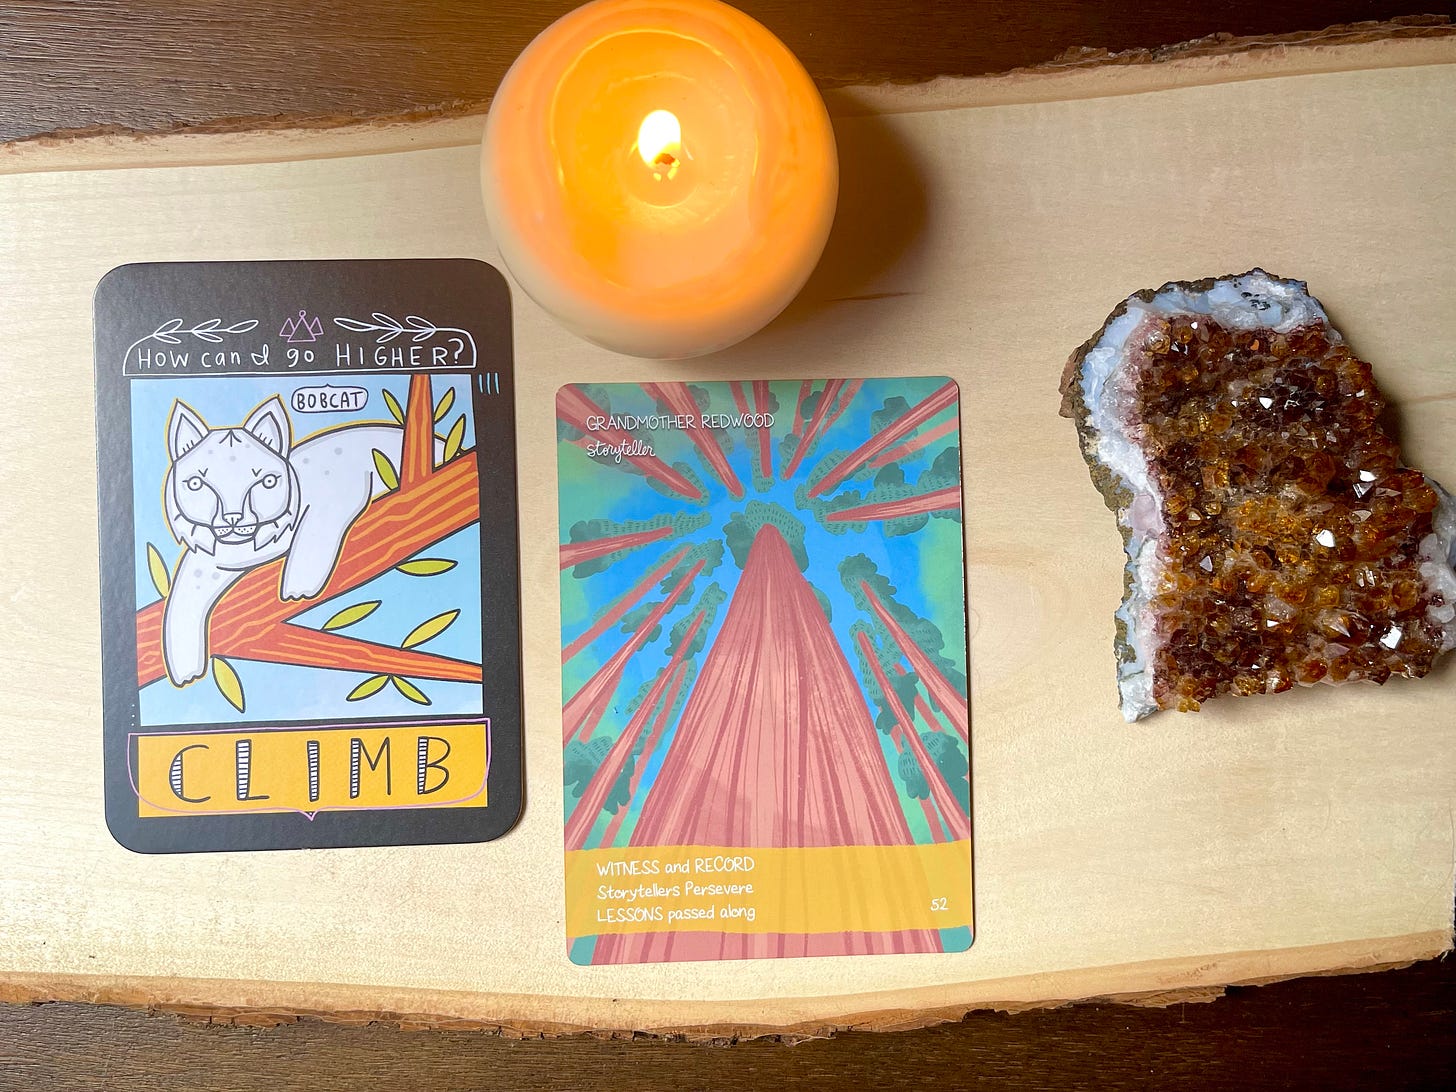 Aerial view of two cards. One with Bobcat art and one with Redwood art. Lit candle above them. Citrine crystal on the left.